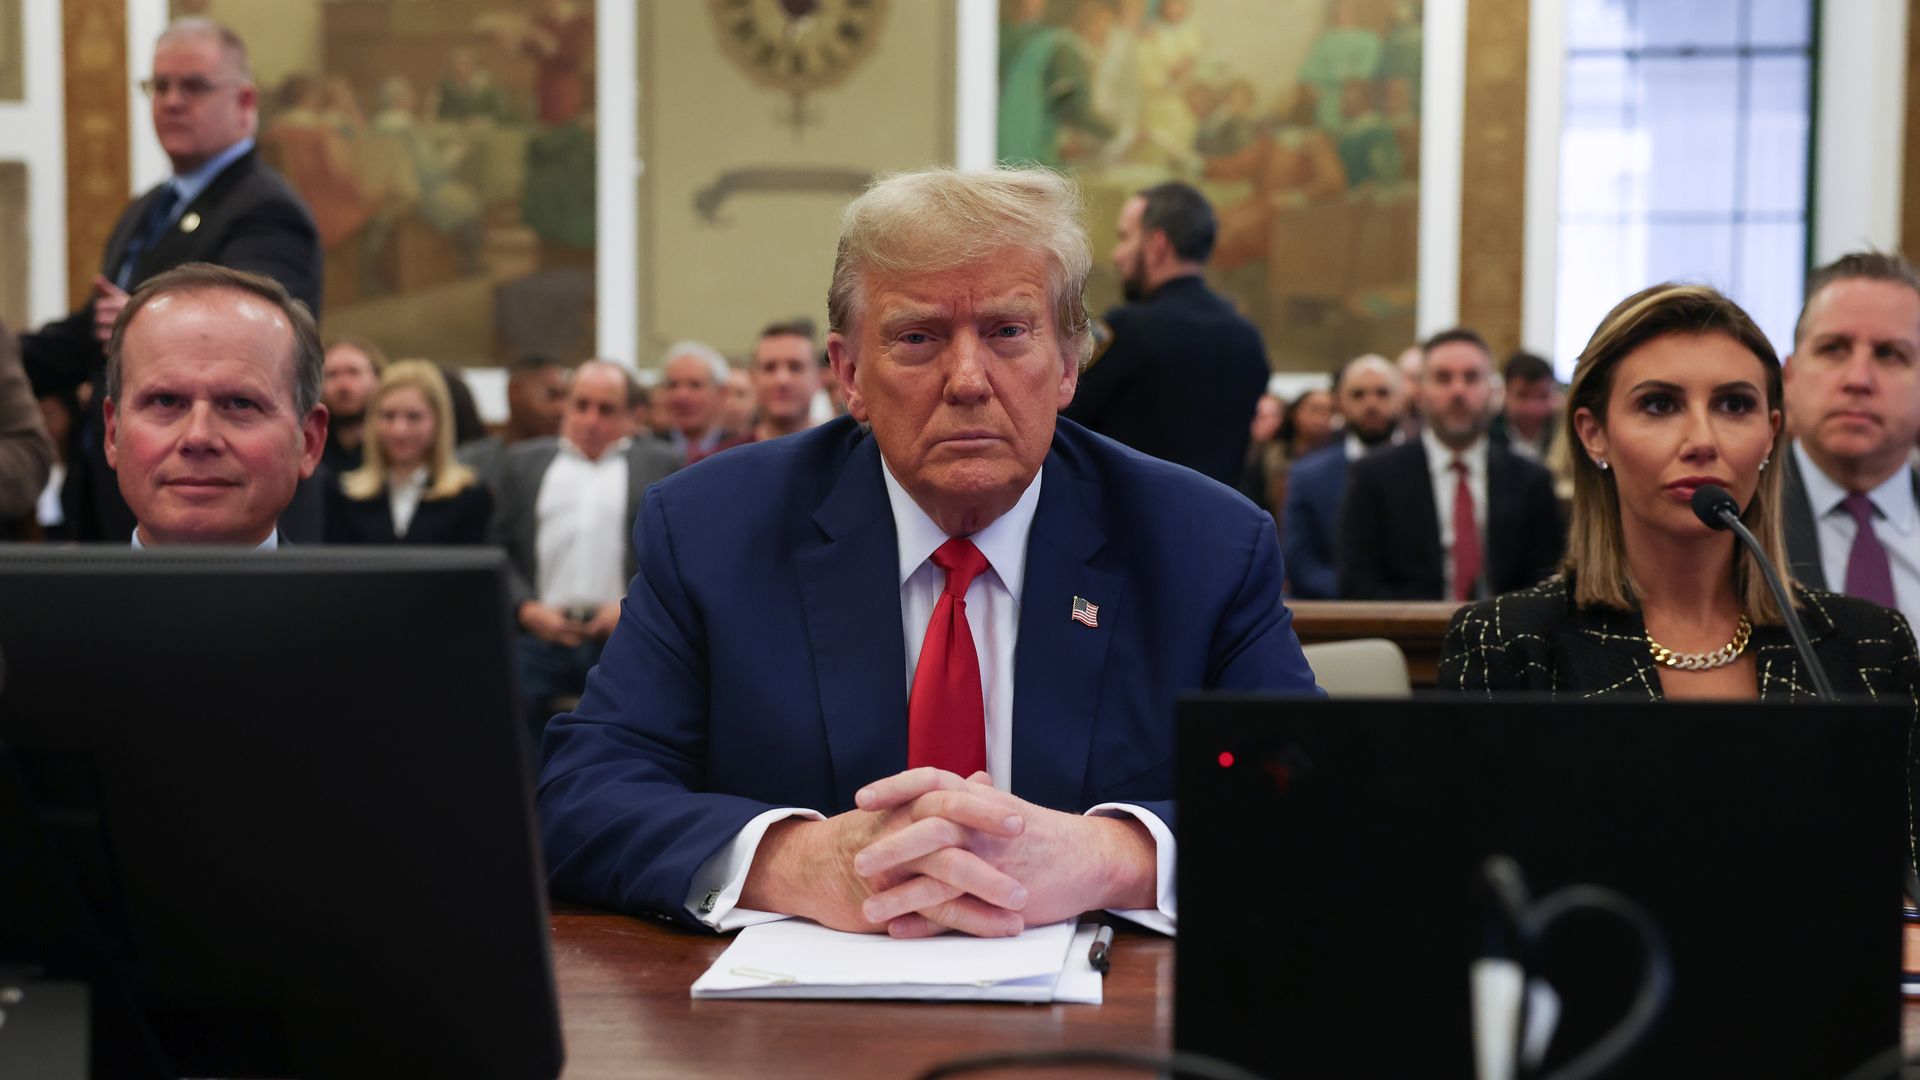 Donald Trump sits at a table in a courtroom with his lawyers